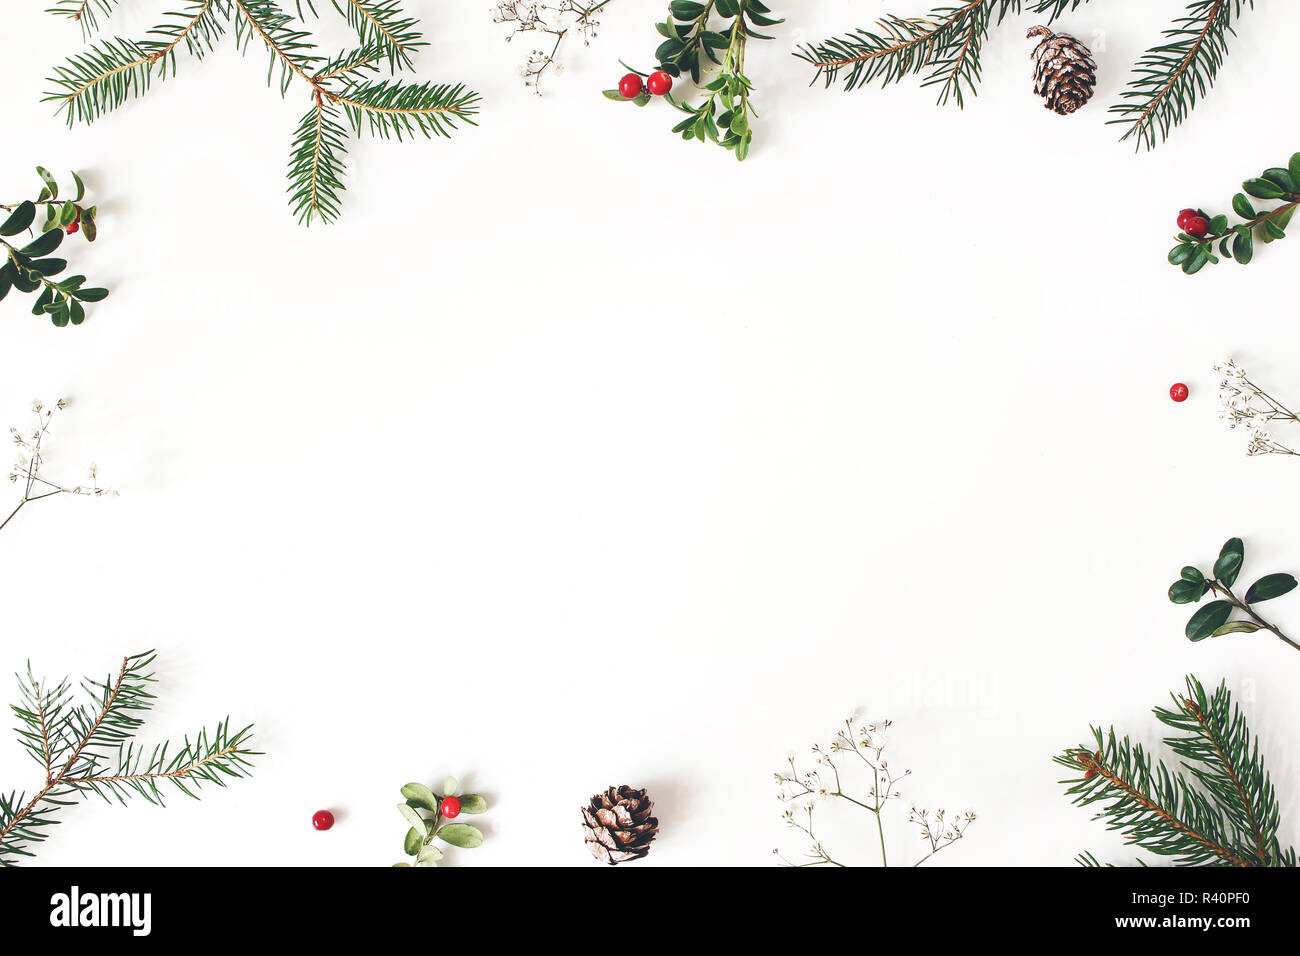 Christmas floral frame, decorative border. Winter composition of red cranberry branches, baby's breath flowers, spruce tree branches and larch cones on white table. Festive background. Flat lay, top view. Stock Photo